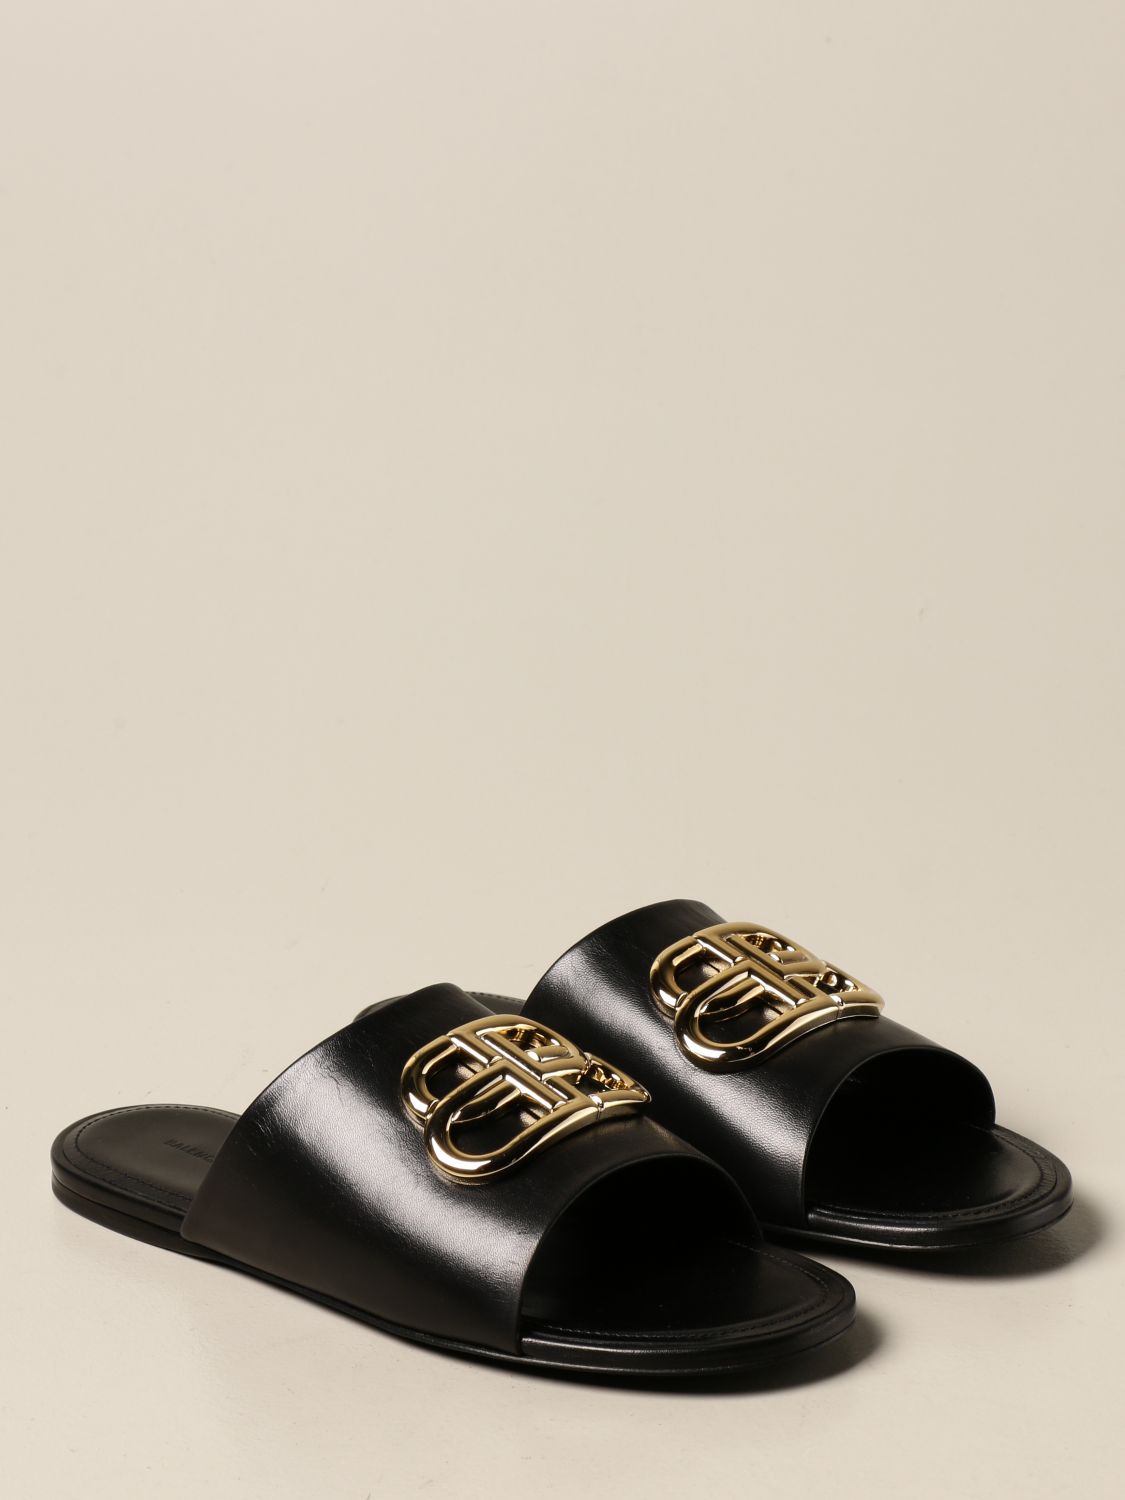 BALENCIAGA: Oval BB sandal in leather with logo | Flat Sandals ...